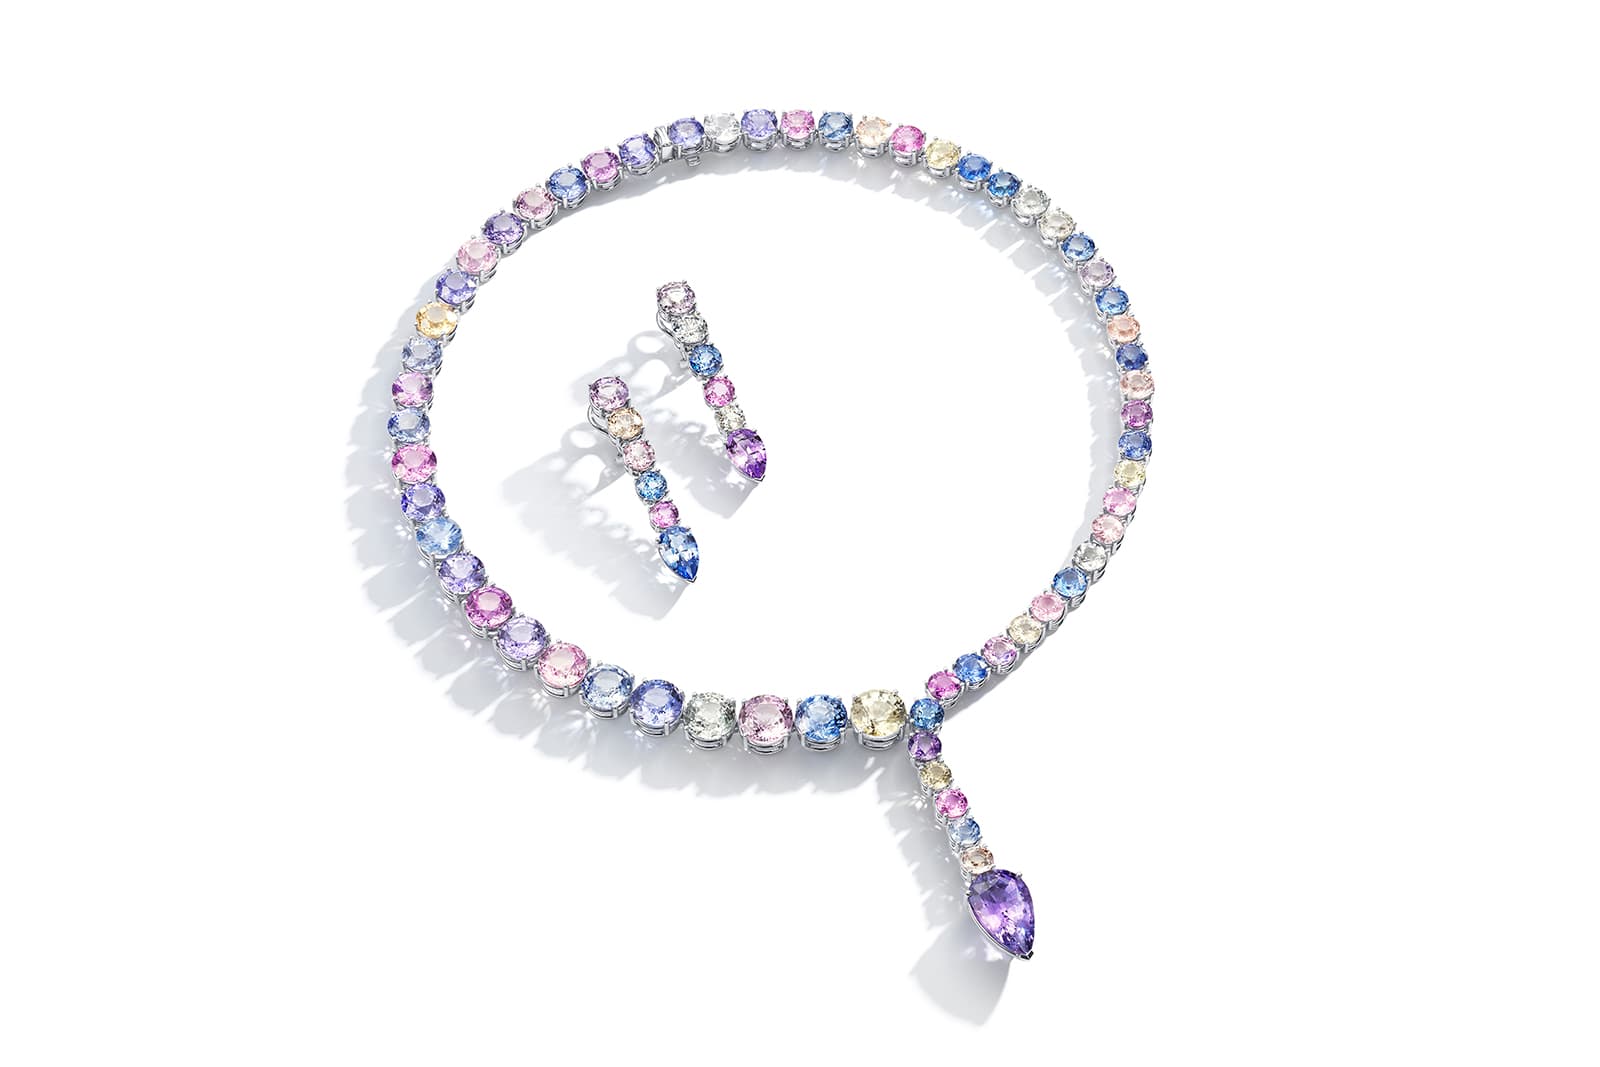 Bucherer Fine Jewellery Pastello Exceptional Waterfall necklace and matching earrings with natural fancy-coloured sapphires and a pear-shaped lavender sapphire of more than 11 carats